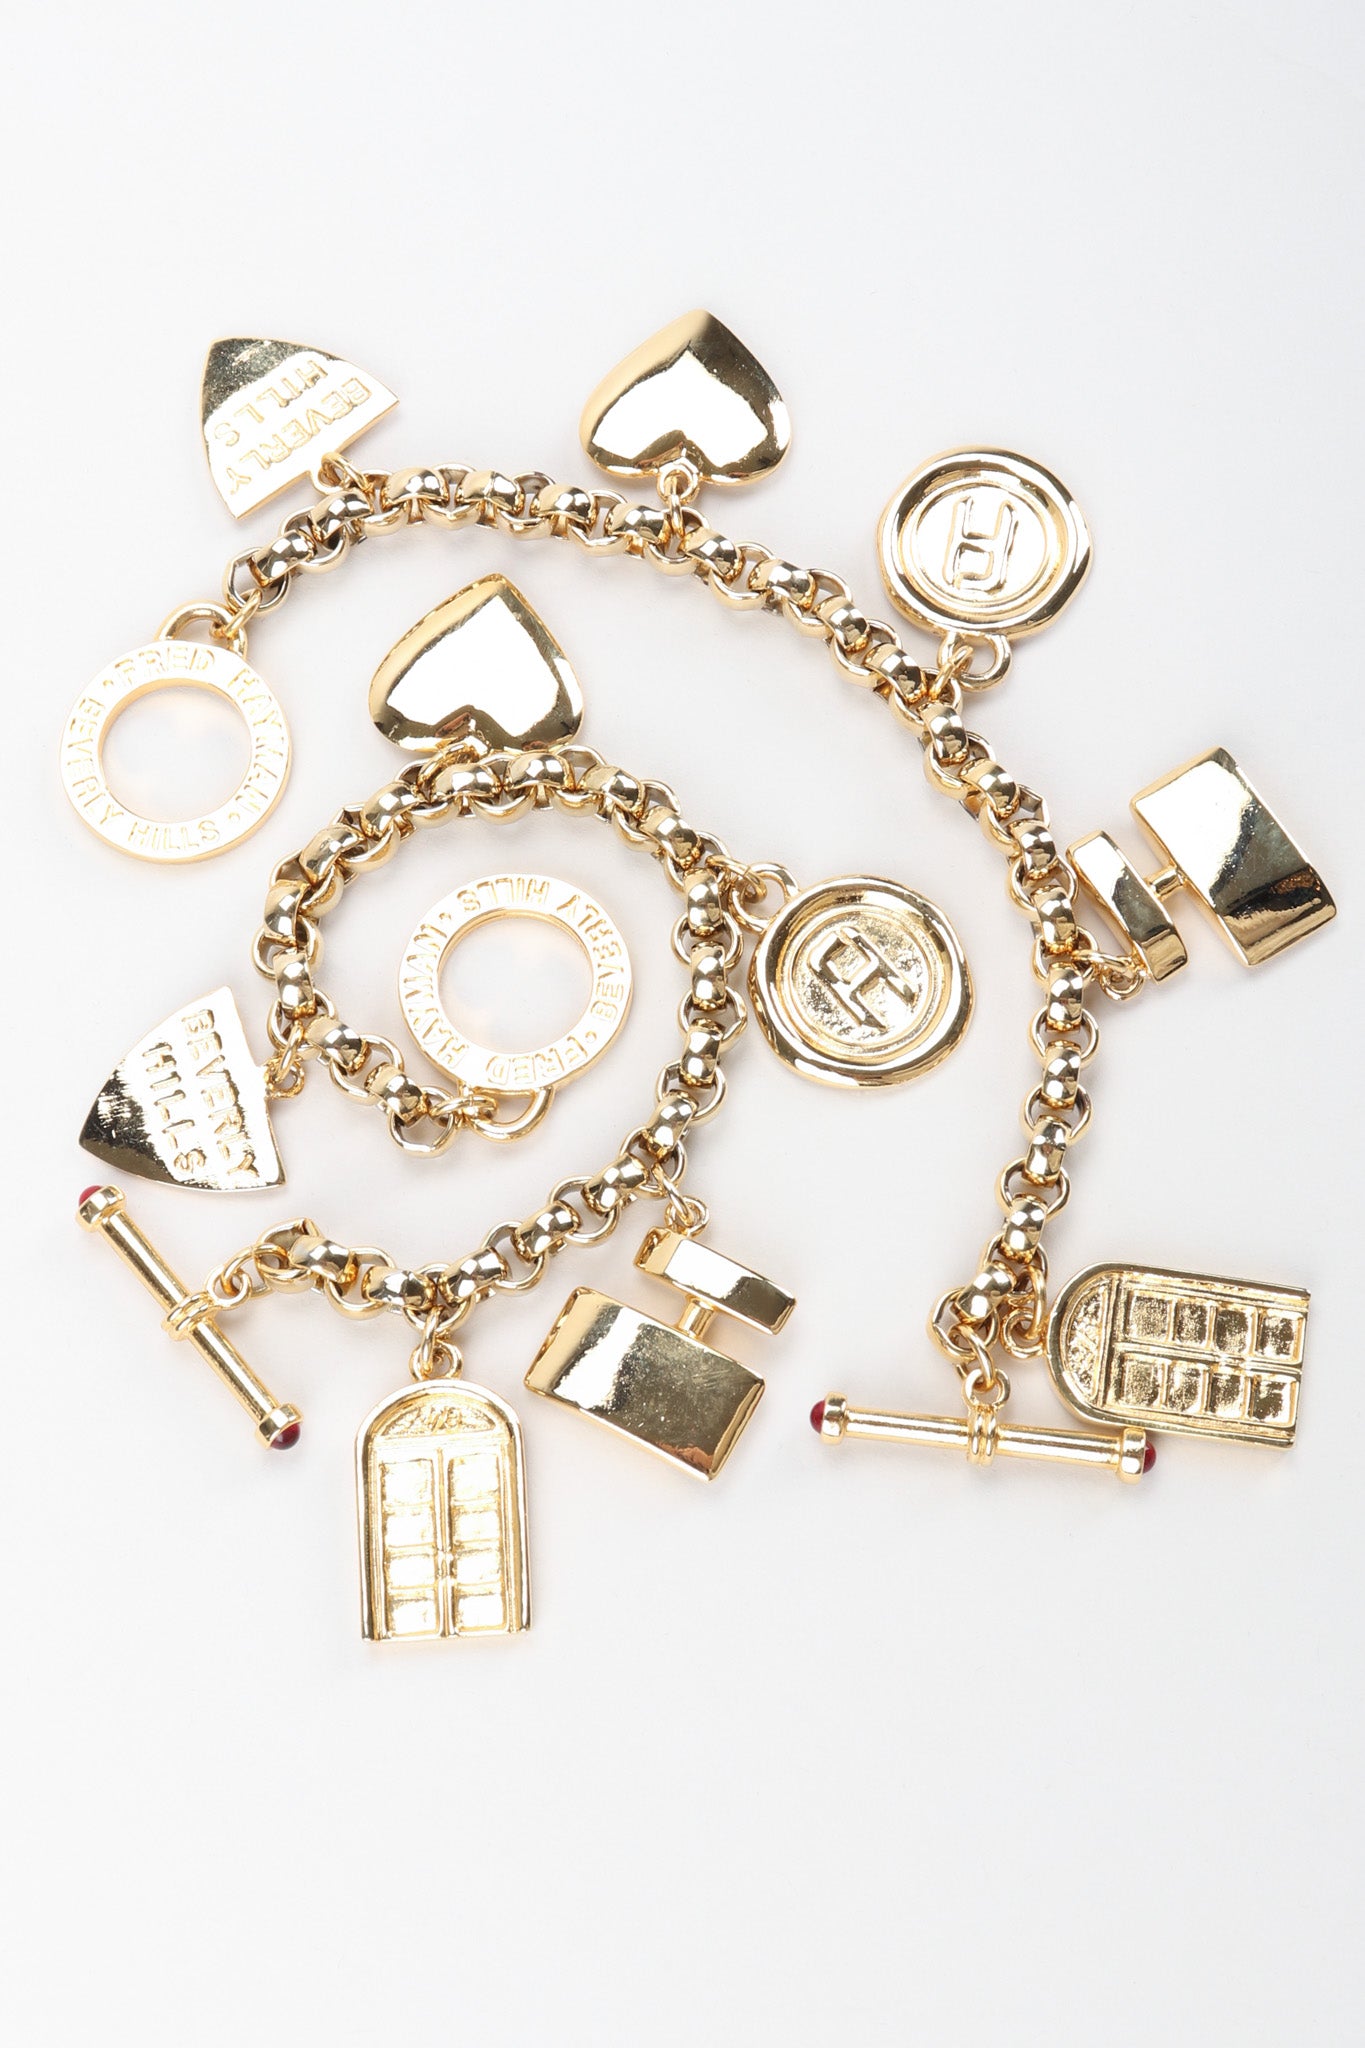 Recess Los Angeles Vintage Fred Hayman Beverly Hills Rodeo Drive Giorgio Charm Bracelet